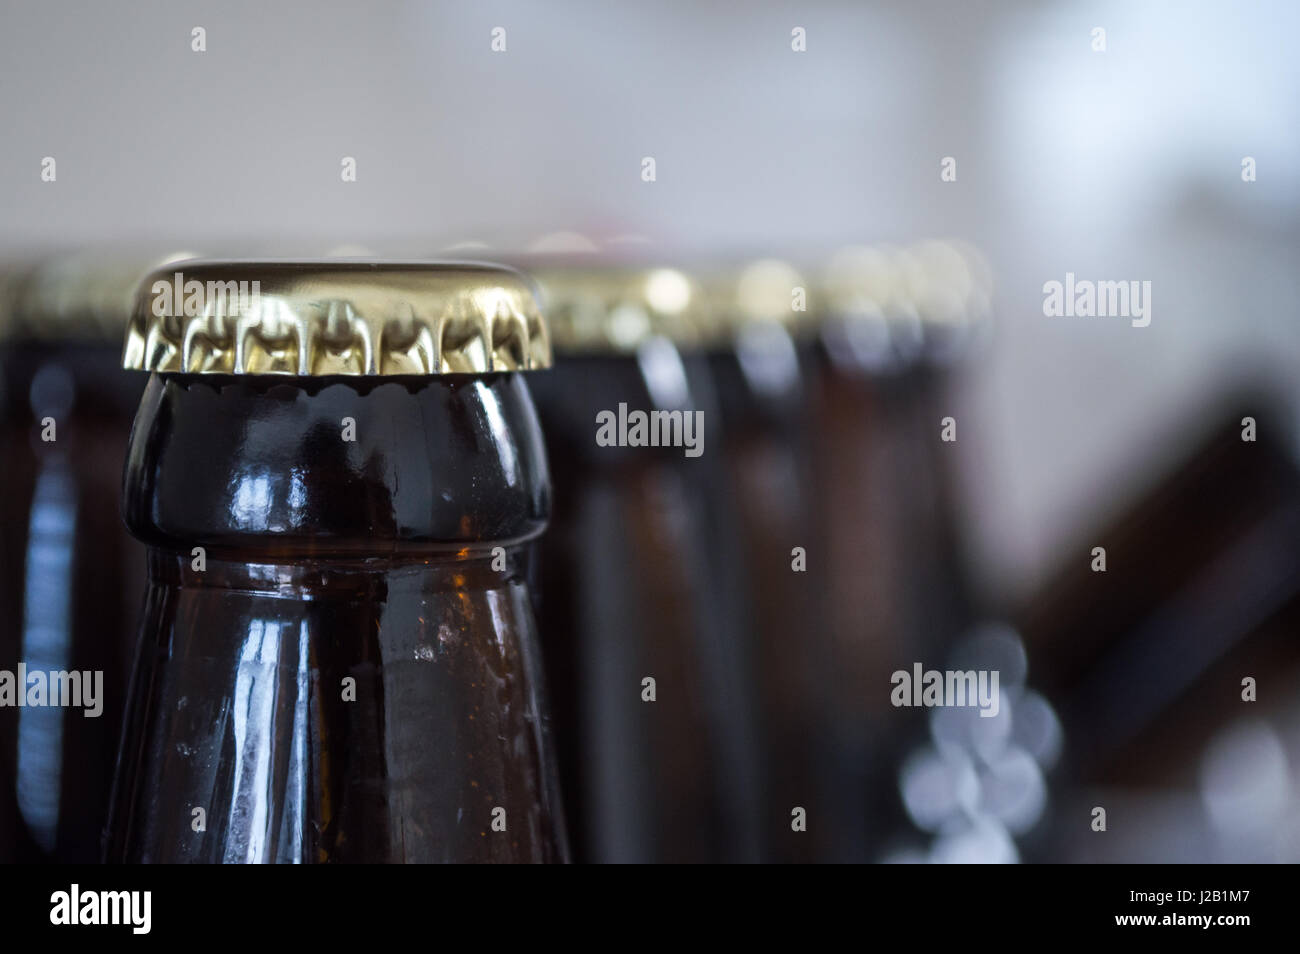 Beer Bottle Caps/Necks in a Row Close Up Stock Photo